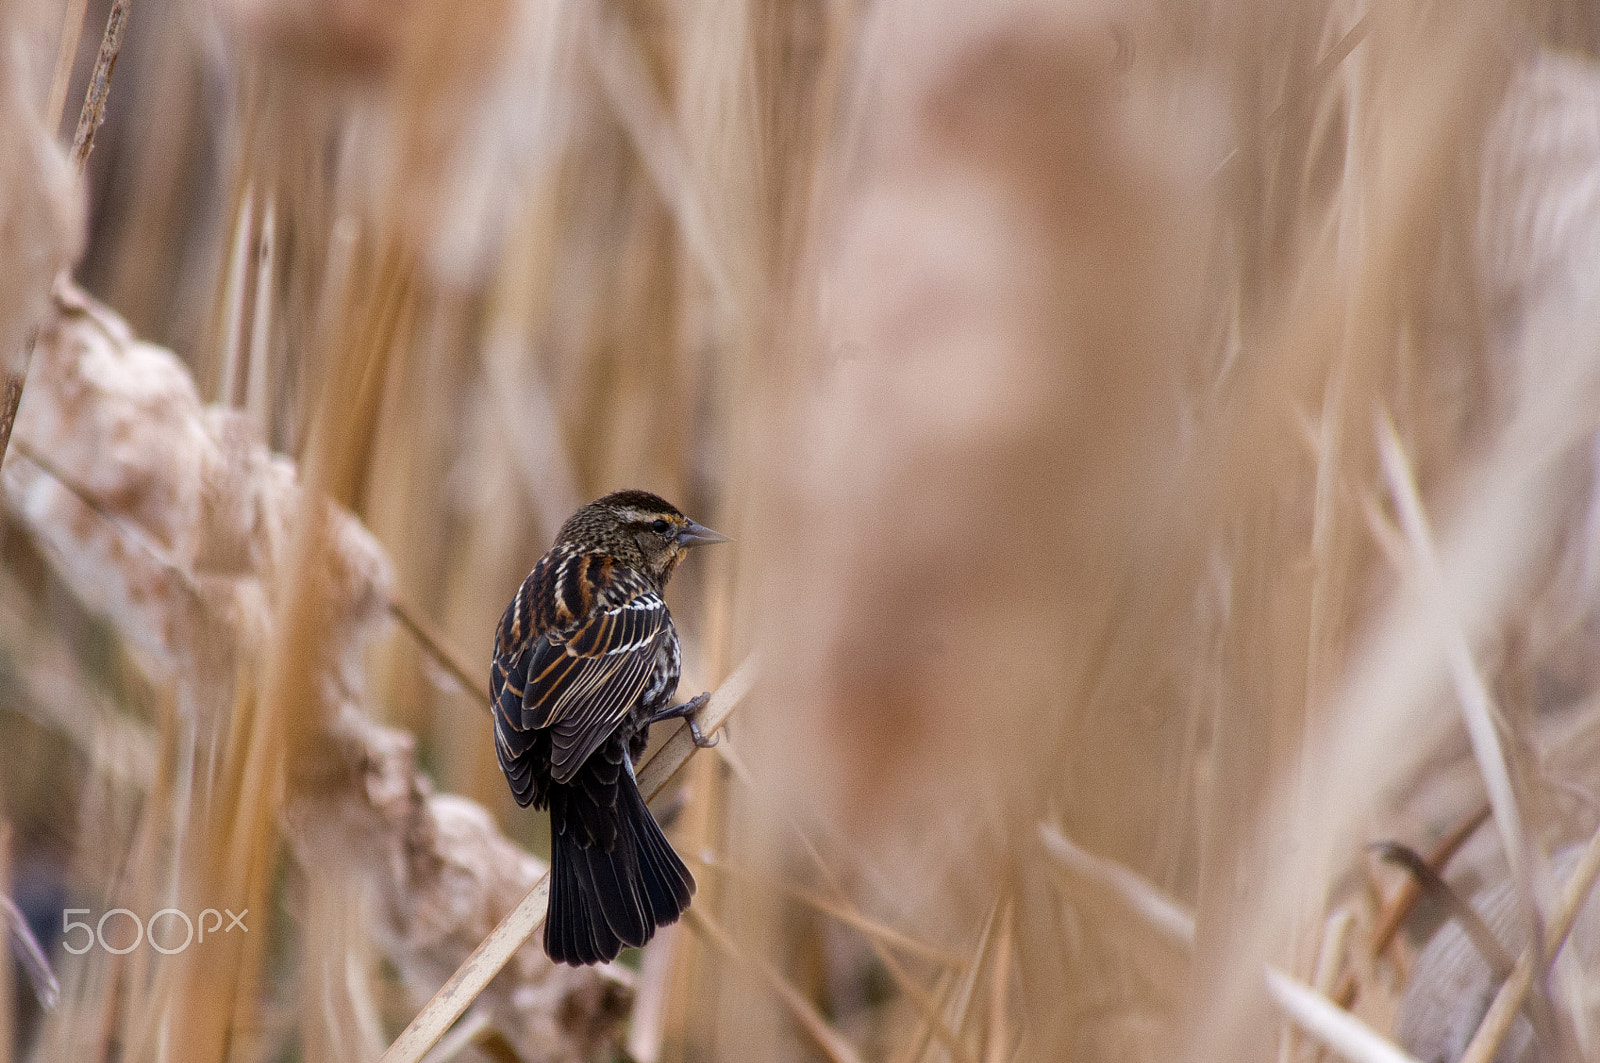 Pentax K-x + Sigma sample photo. Hiding in the reeds photography